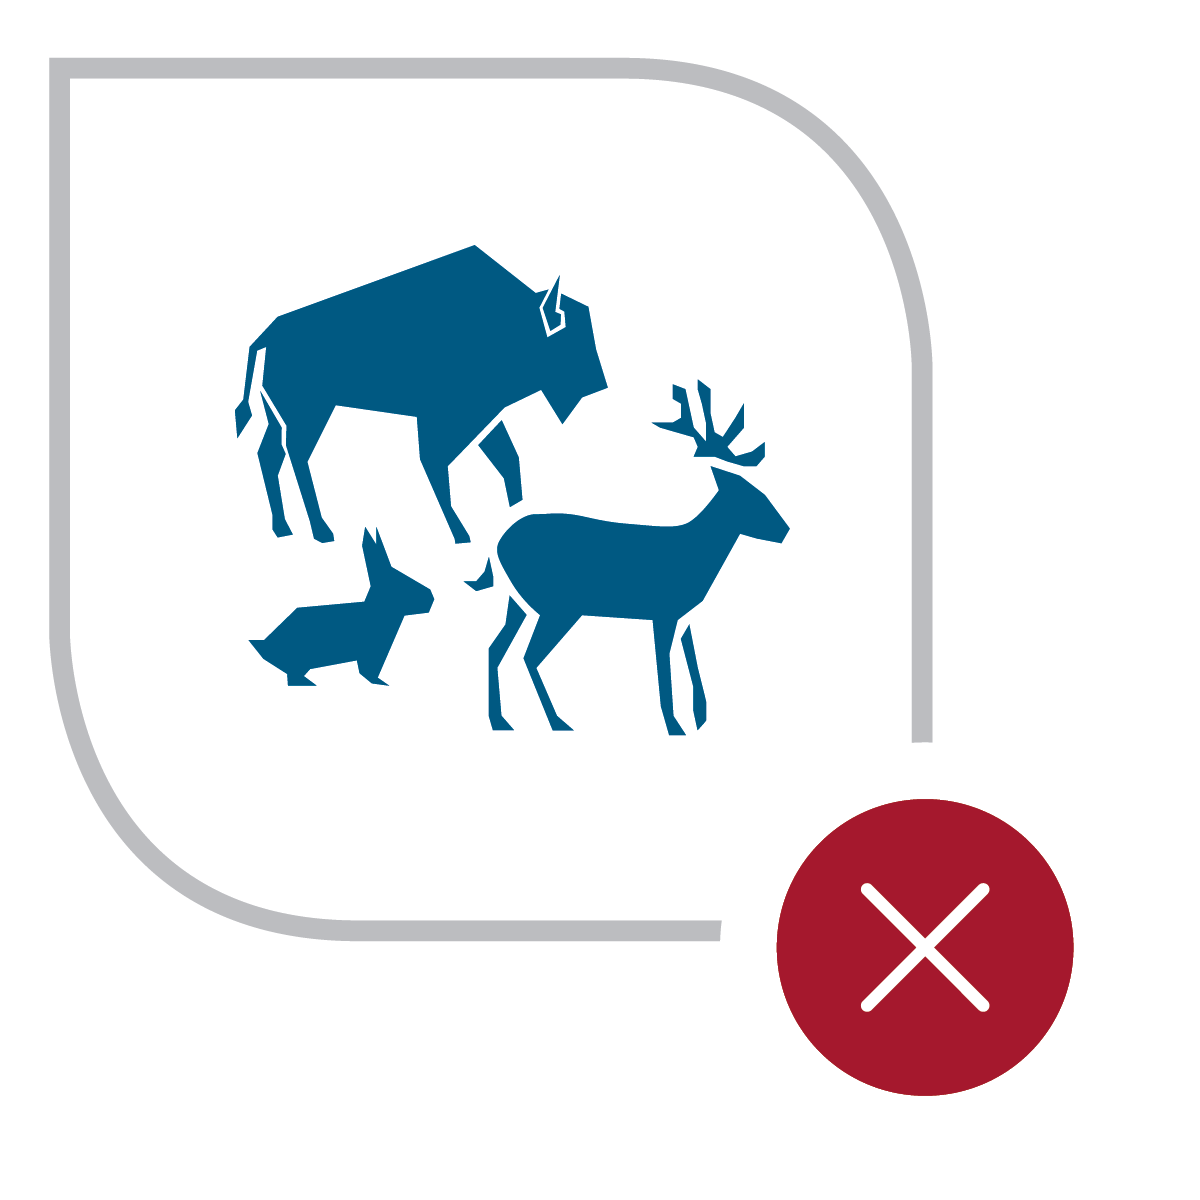 An icon featuring the silhouette of a rabbit, a deer, and a bull, with a red X in the bottom right